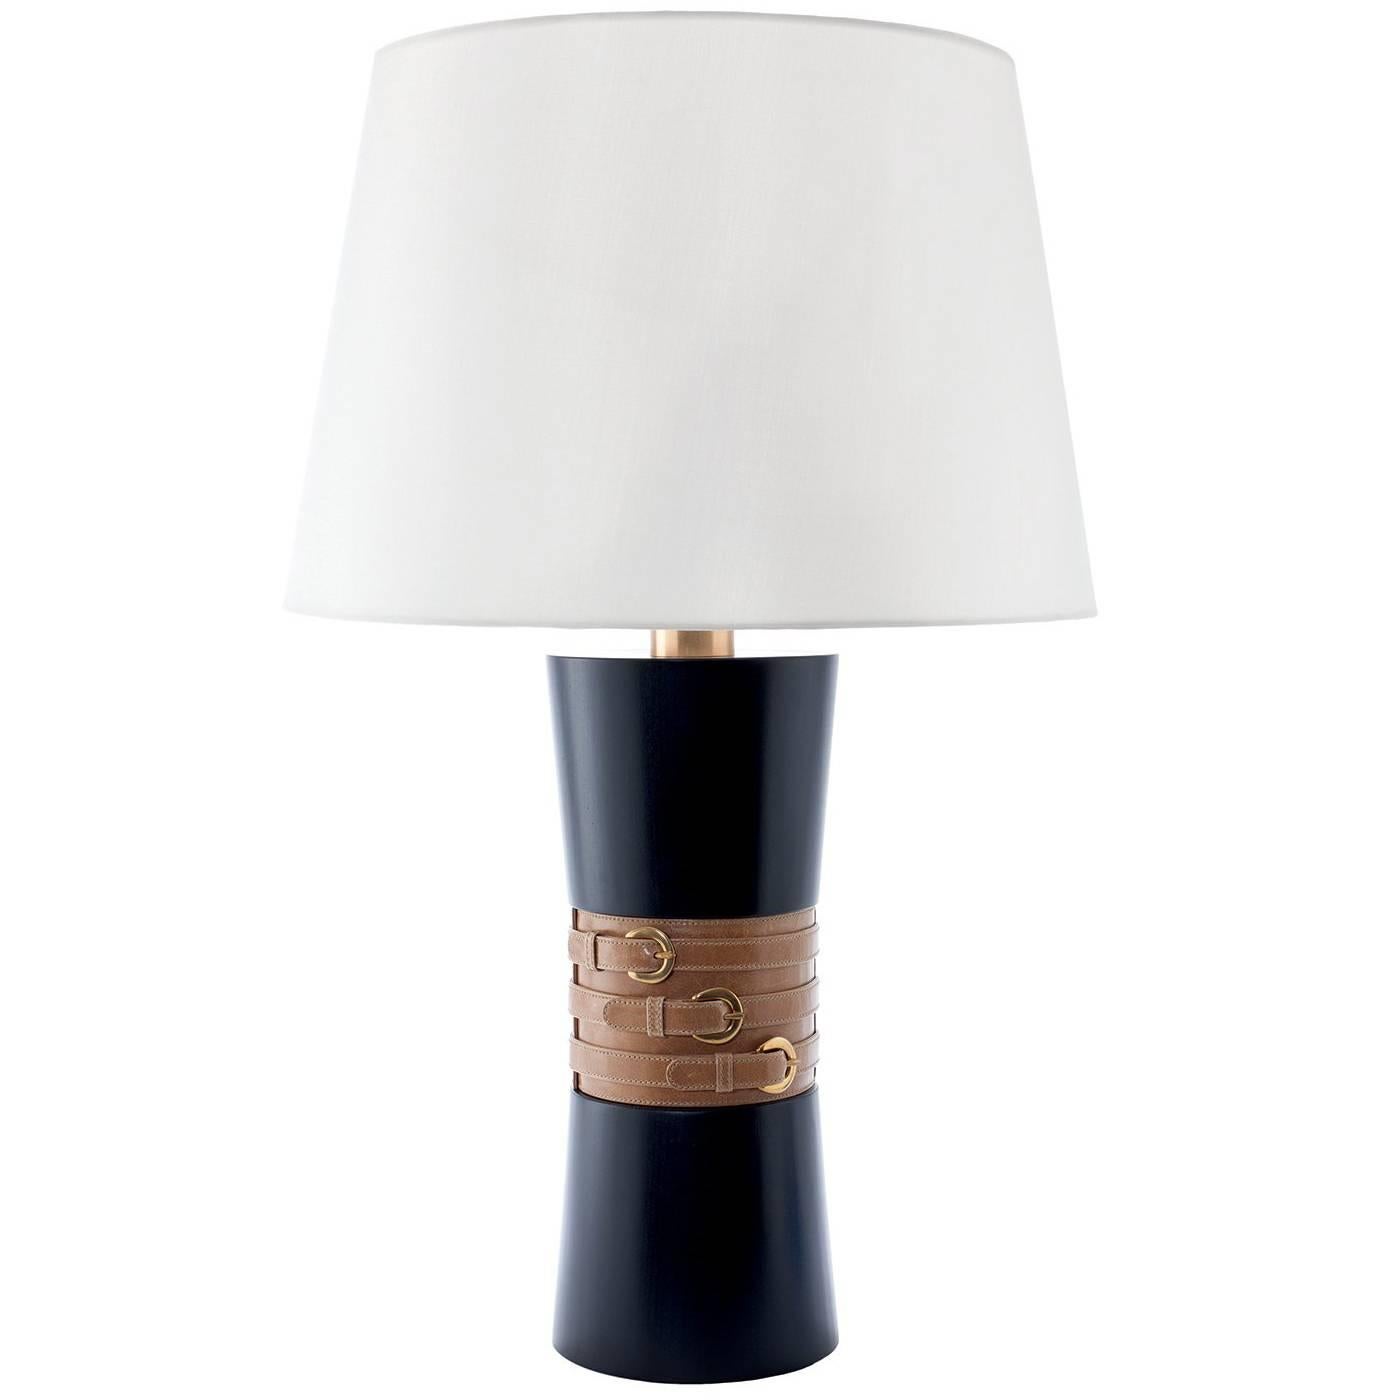 Mina Table Lamp in Wood with Leather Detail by Carbonell Design